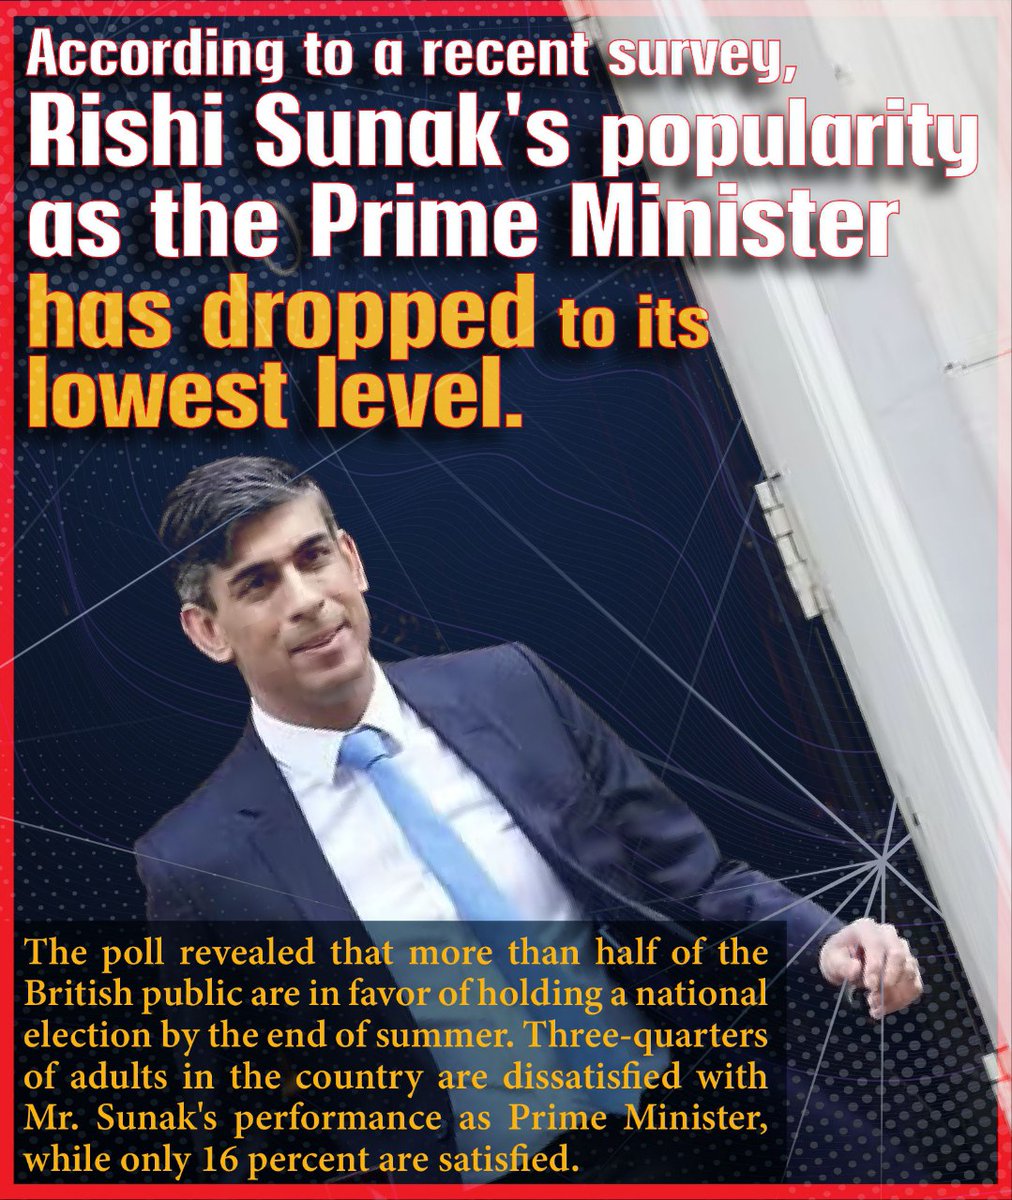 Rishi Sunak's popularity as Prime Minister has sunk to an all-time low, according to a new poll. The poll showed that more than half of Britons want a general election by the end of the summer. Three-quarters of adults in the country are dissatisfied with Mr.